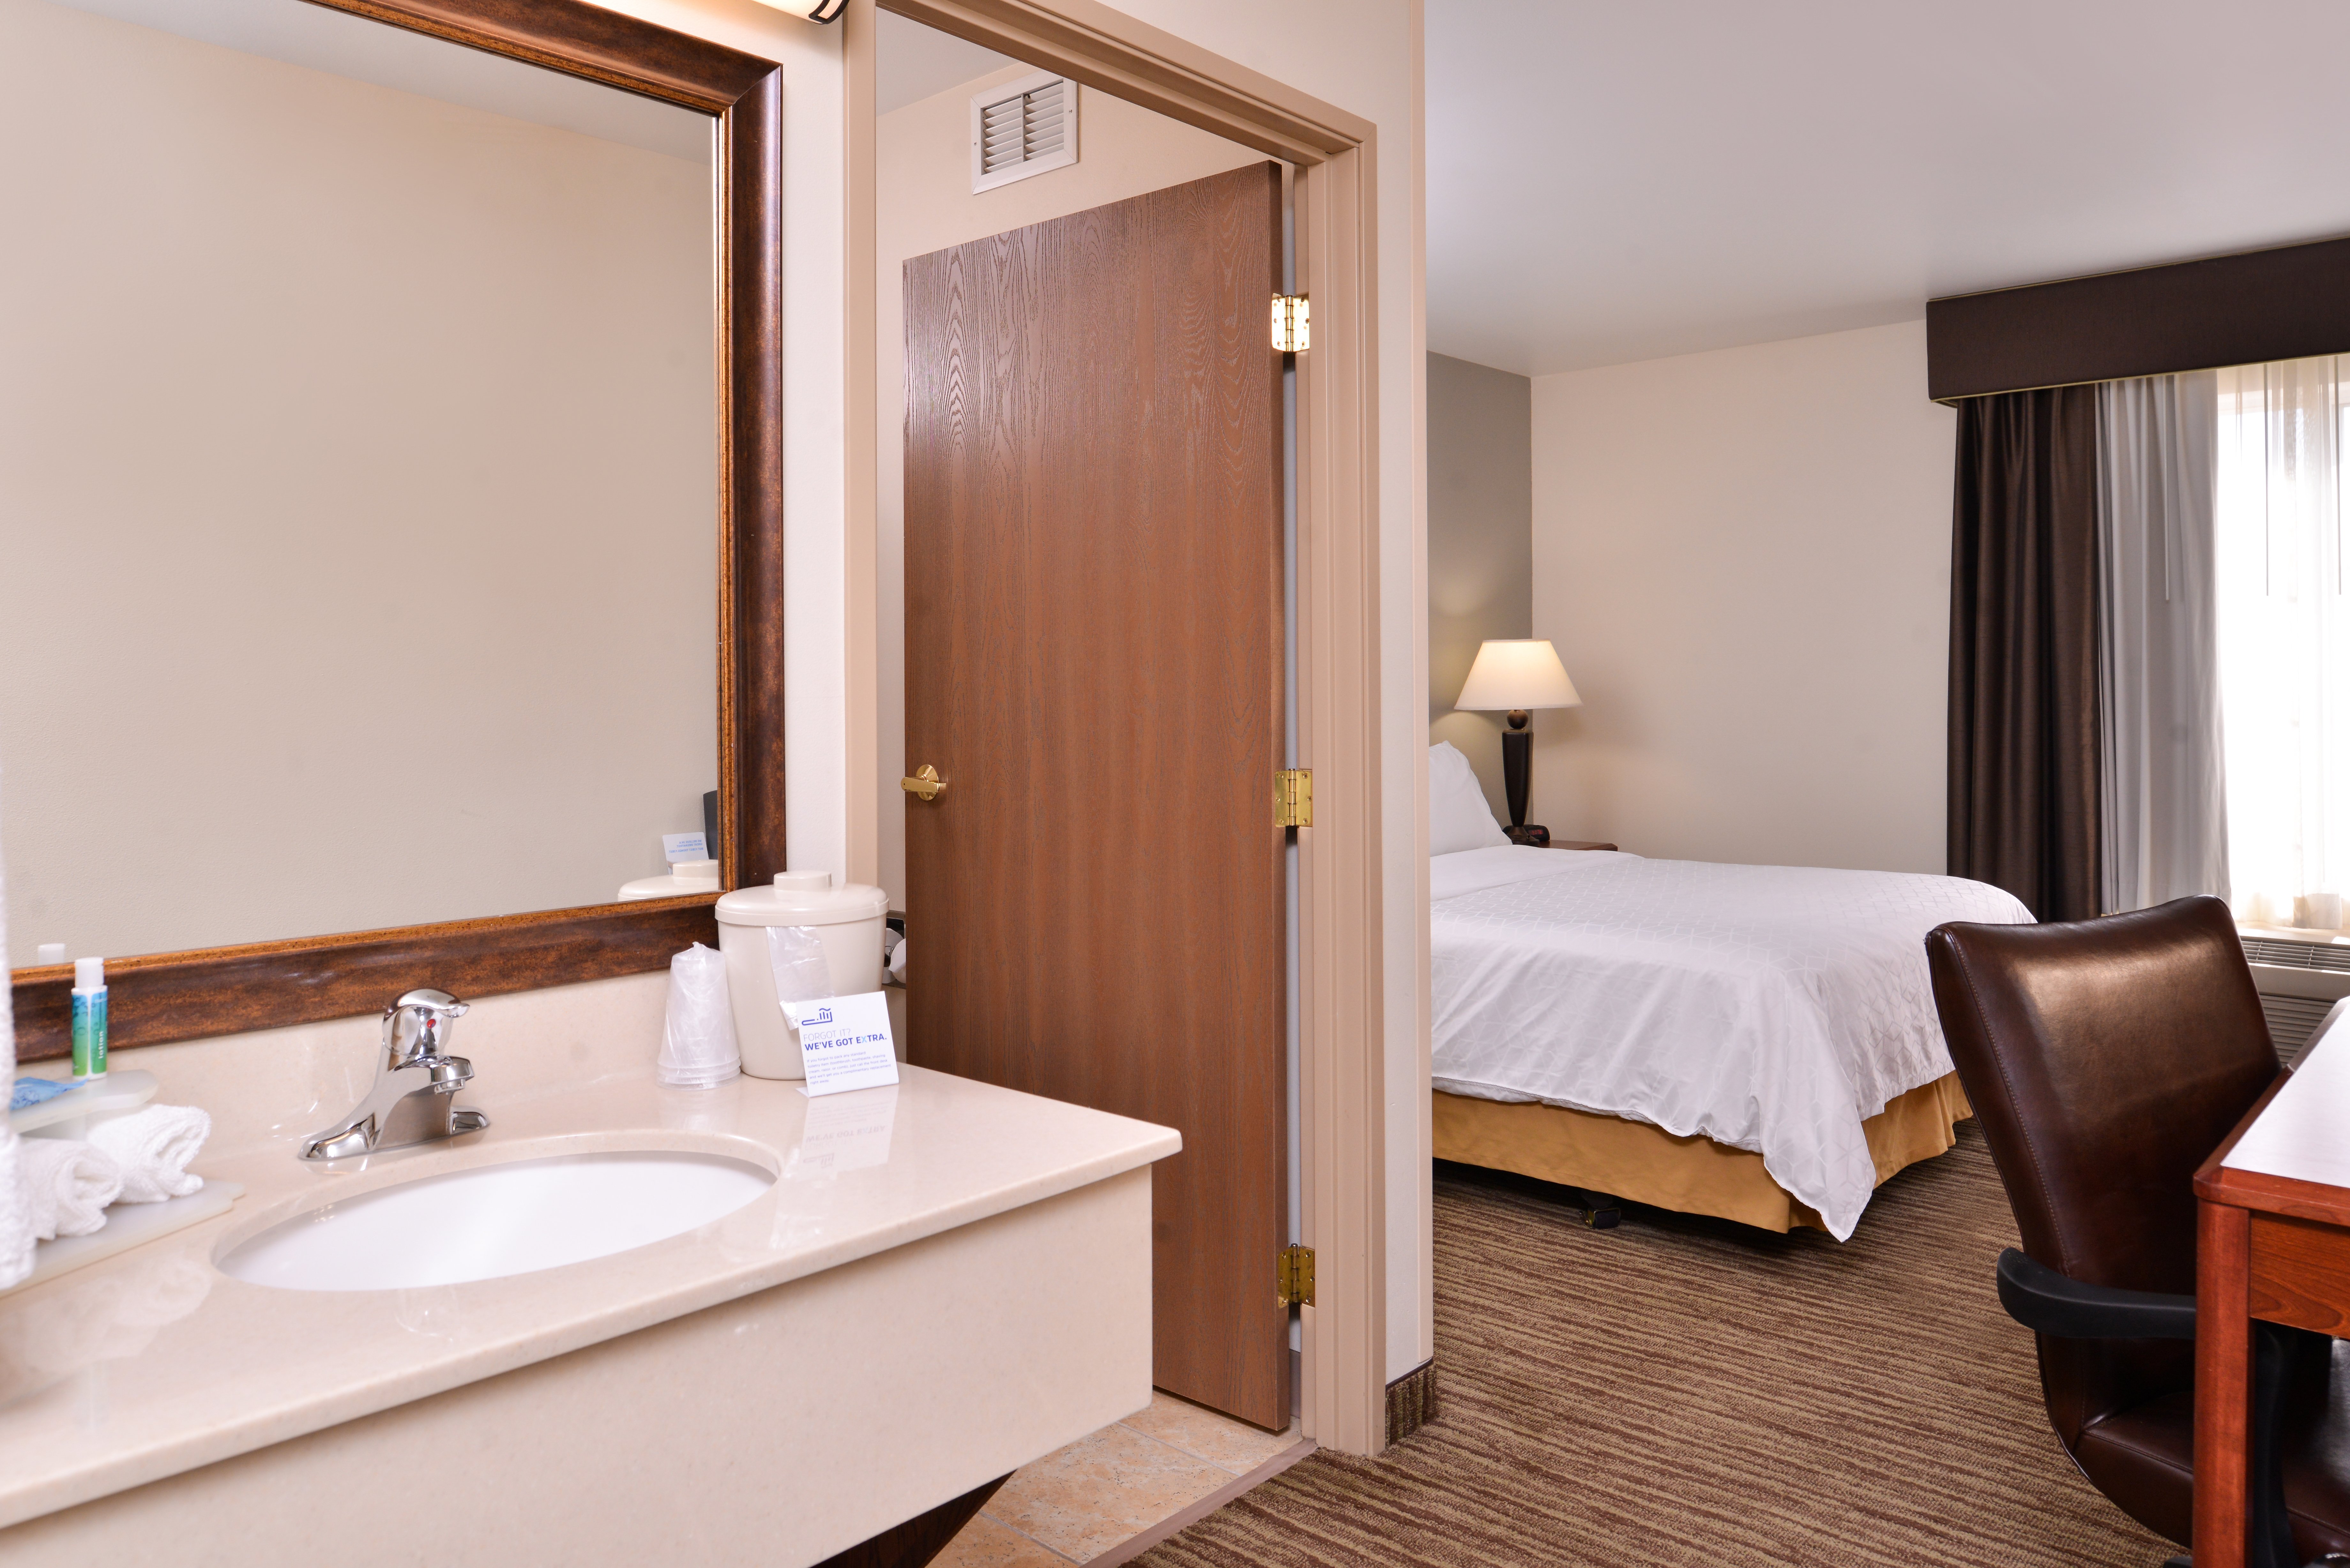 Relax in our guestroom and make yourself at home.